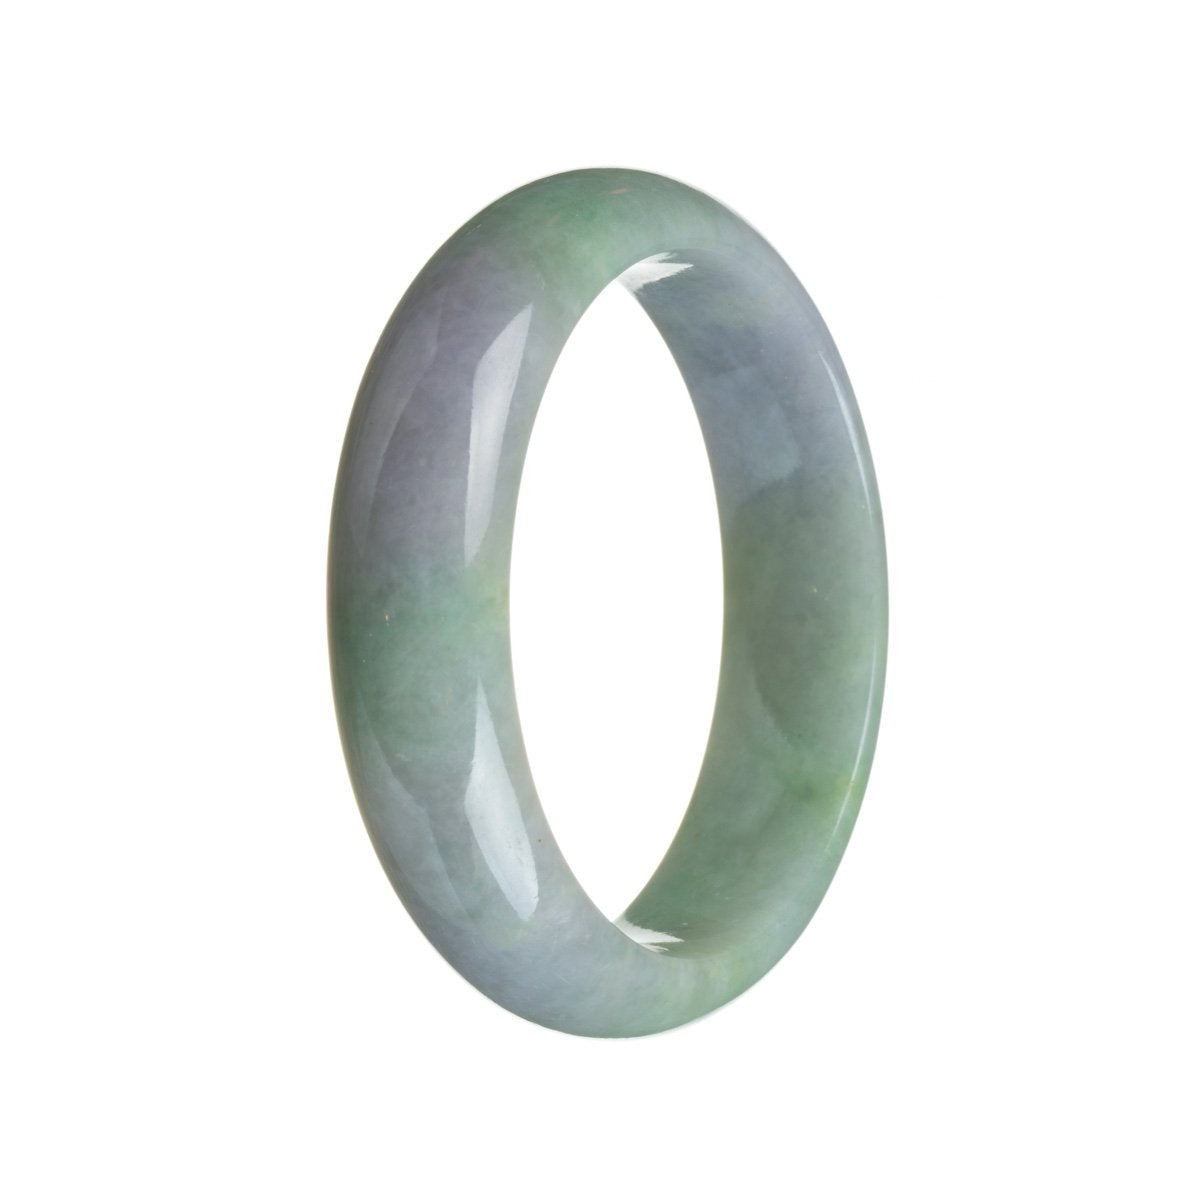 A half moon-shaped jade bangle bracelet in untreated green and lavender colors, showcasing traditional craftsmanship.